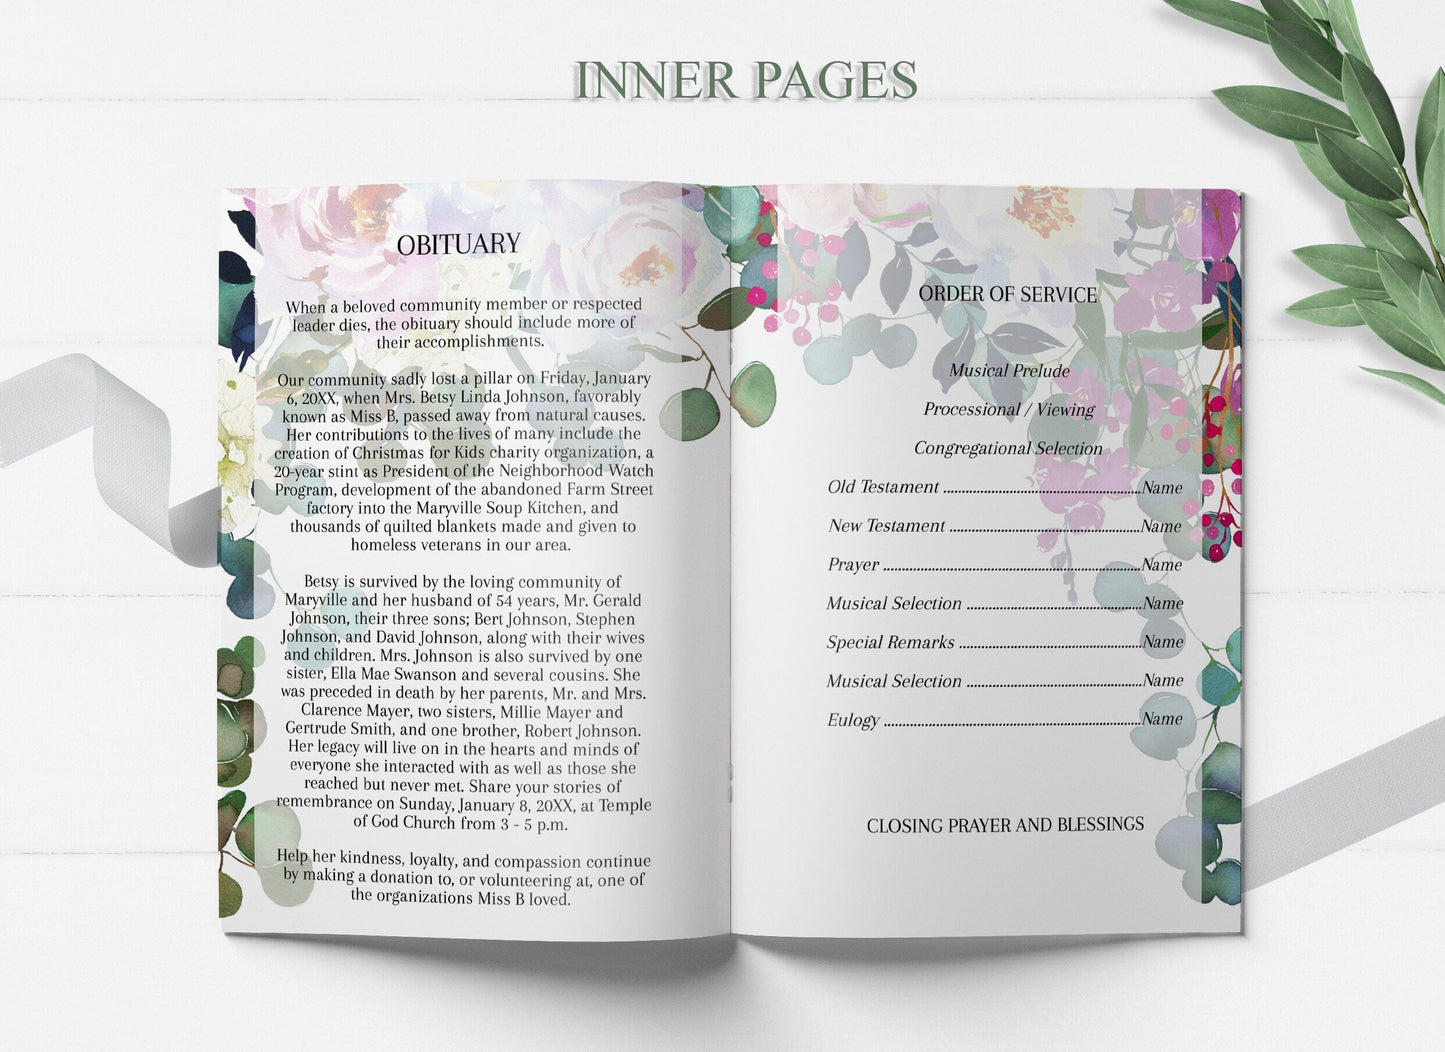 obituary insert and order of service insert for funeral program templates